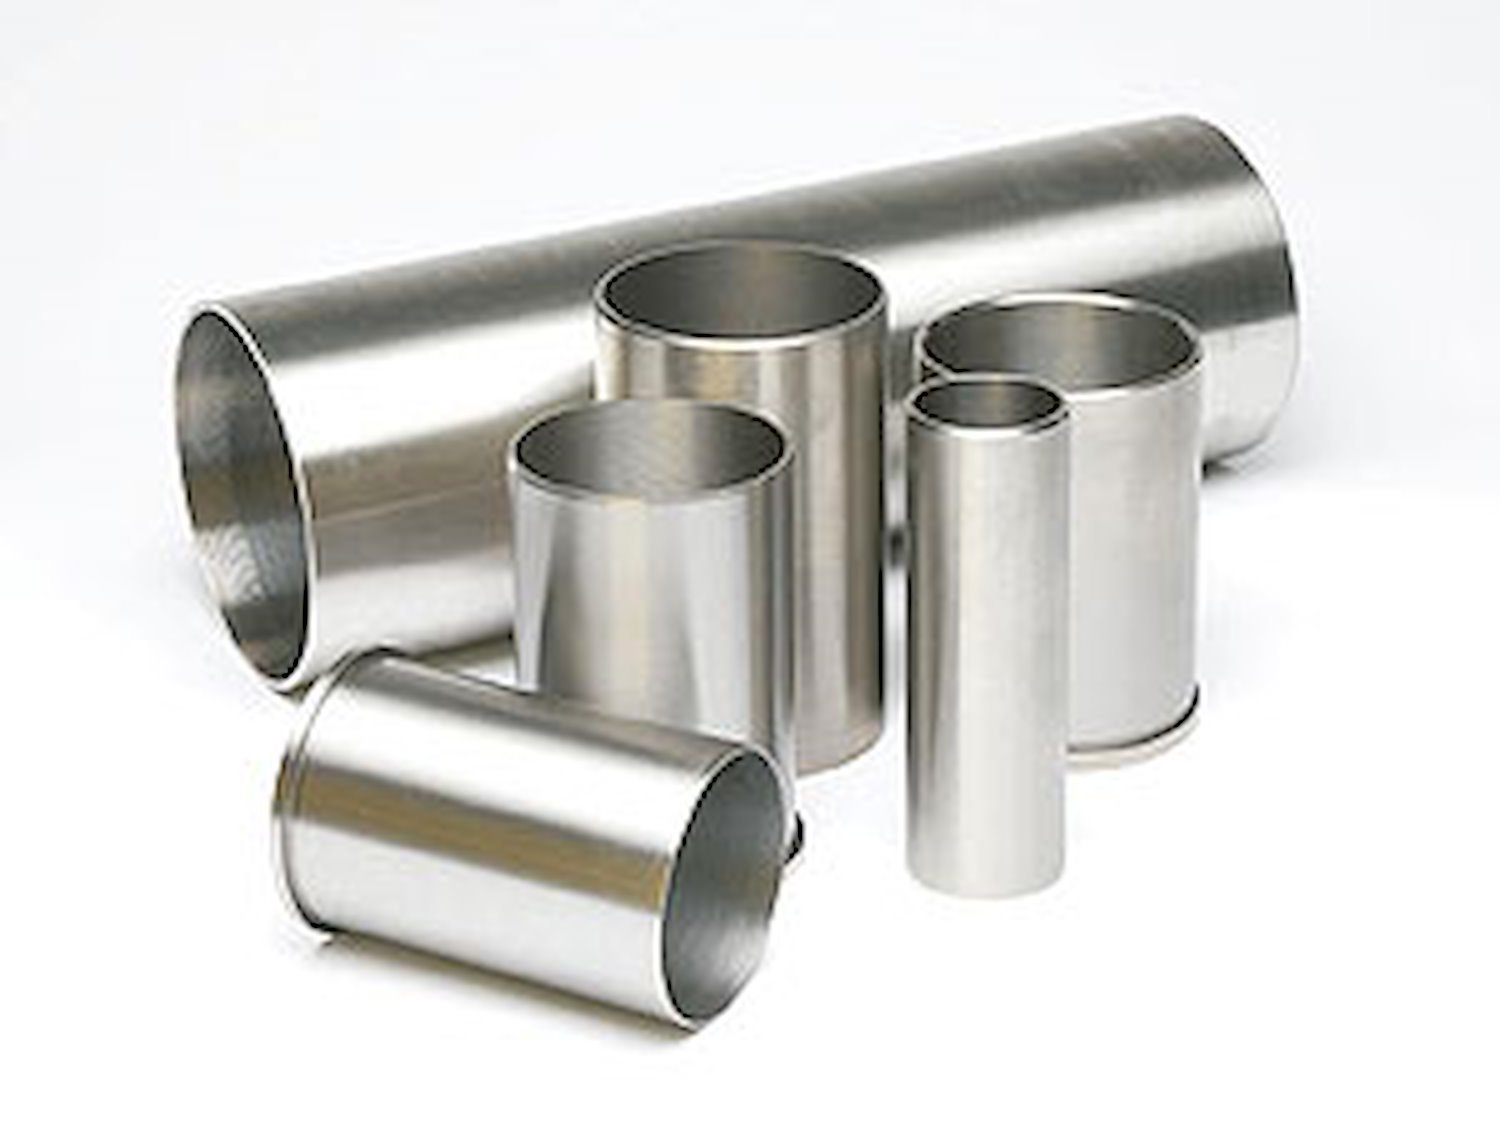 Cylinder Sleeve Bore: 3.1250" Length: 8-1/8" Wall Thickness: 1/8"